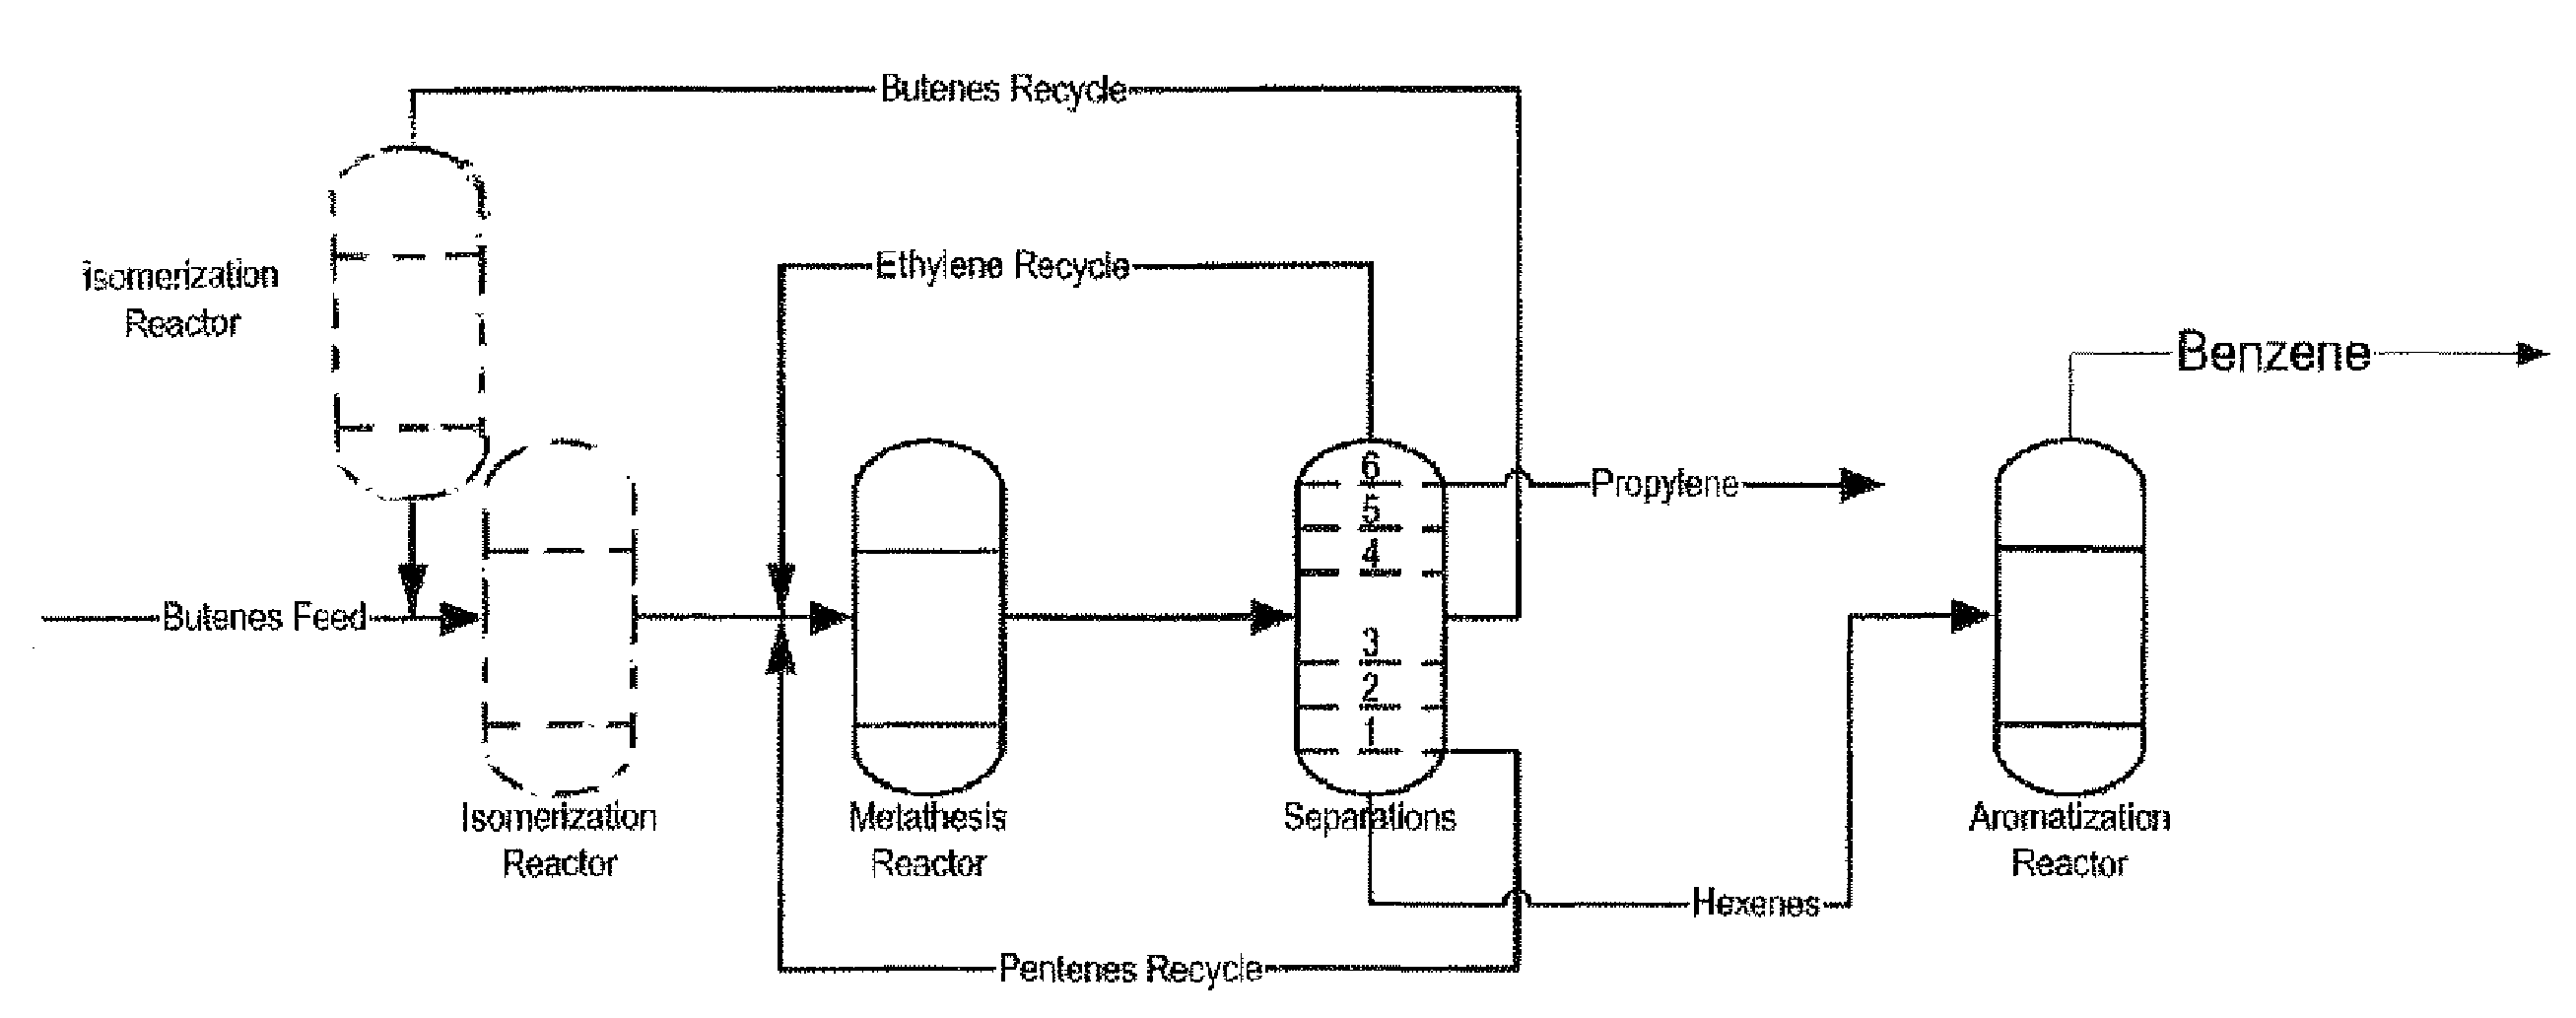 Process for producing propylene and aromatics from butenes by metathesis and aromatization